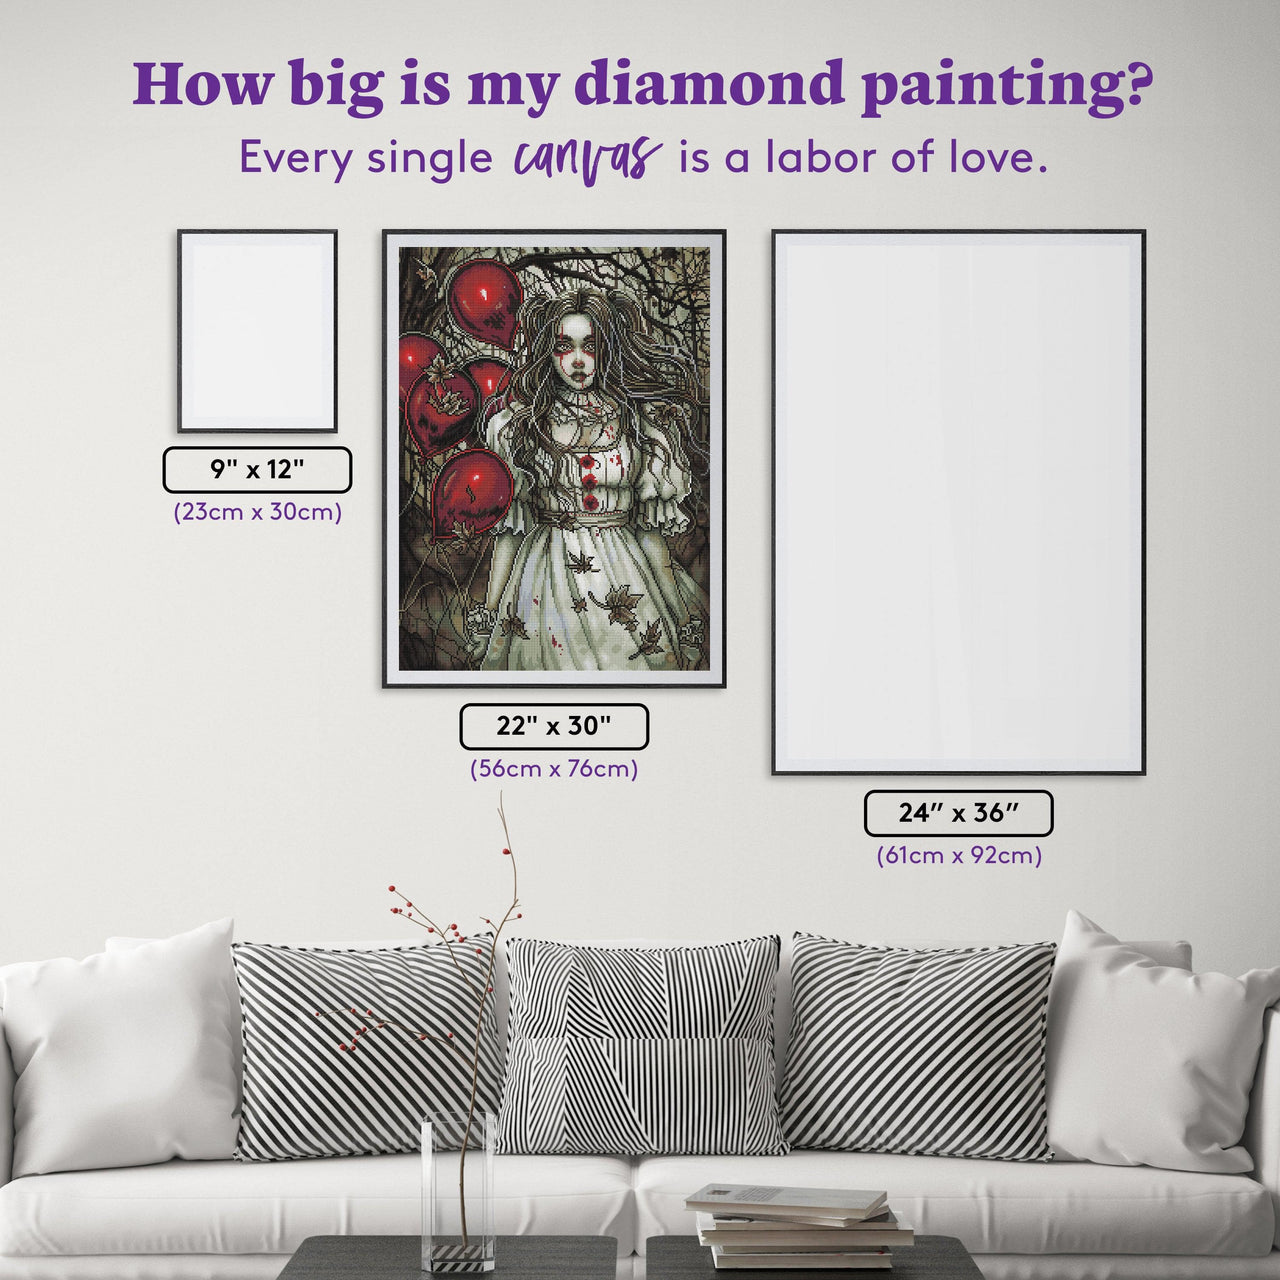 Diamond Painting Corydon Babe 22" x 30" (56cm x 76cm) / Round with 39 Colors including 2 ABs / 53,929